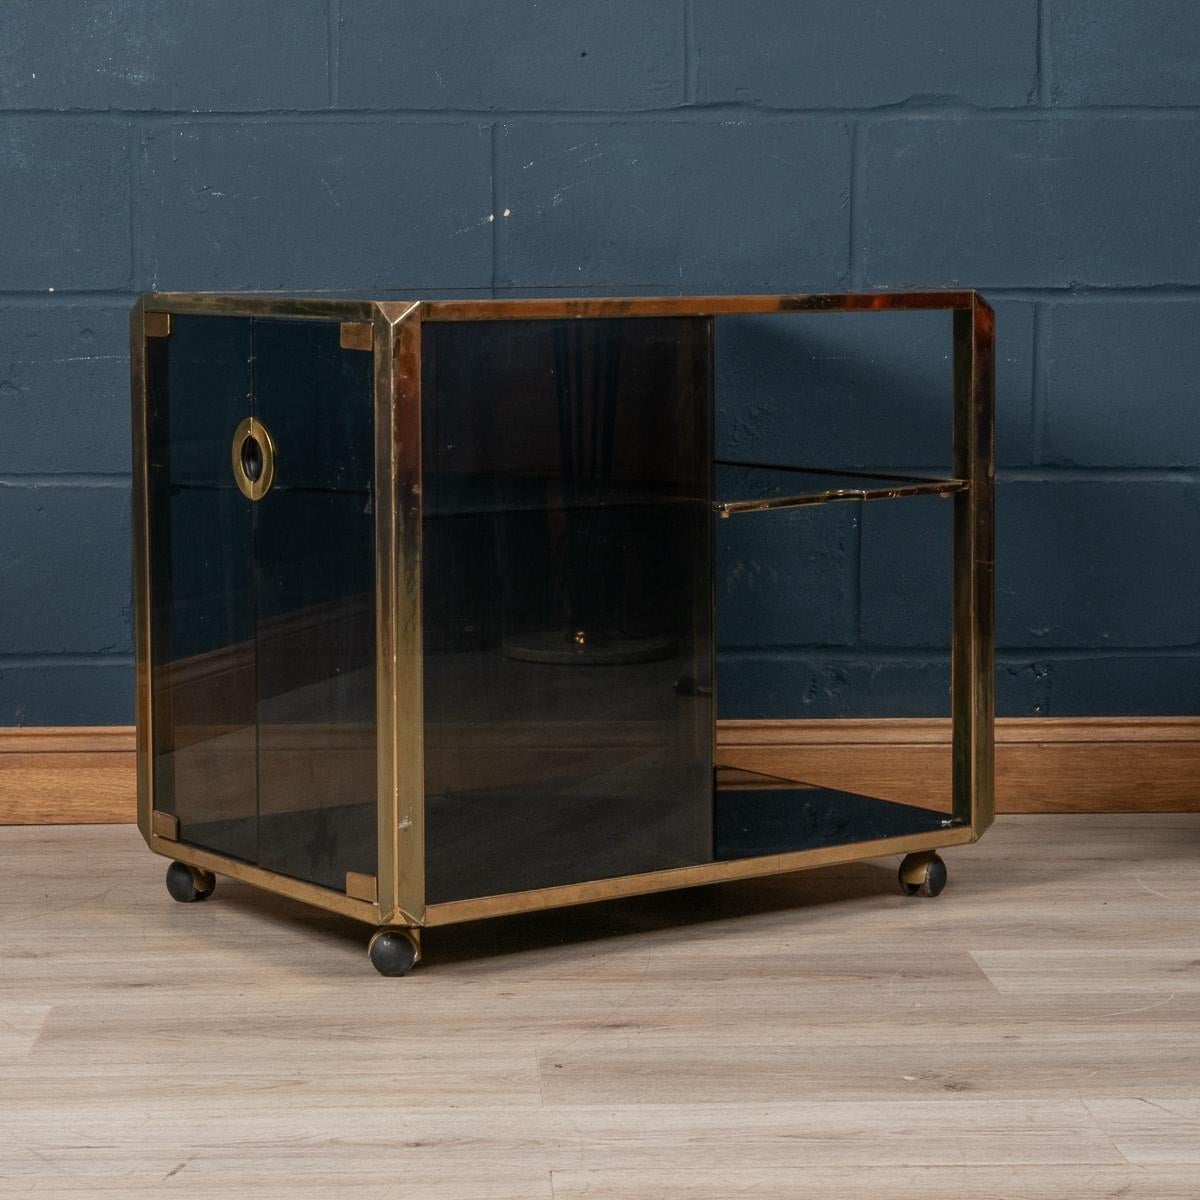 Italian 20th Century Brass Framed Cocktail Trolley, Willy Rizzo For Mario Sabot, c.1970